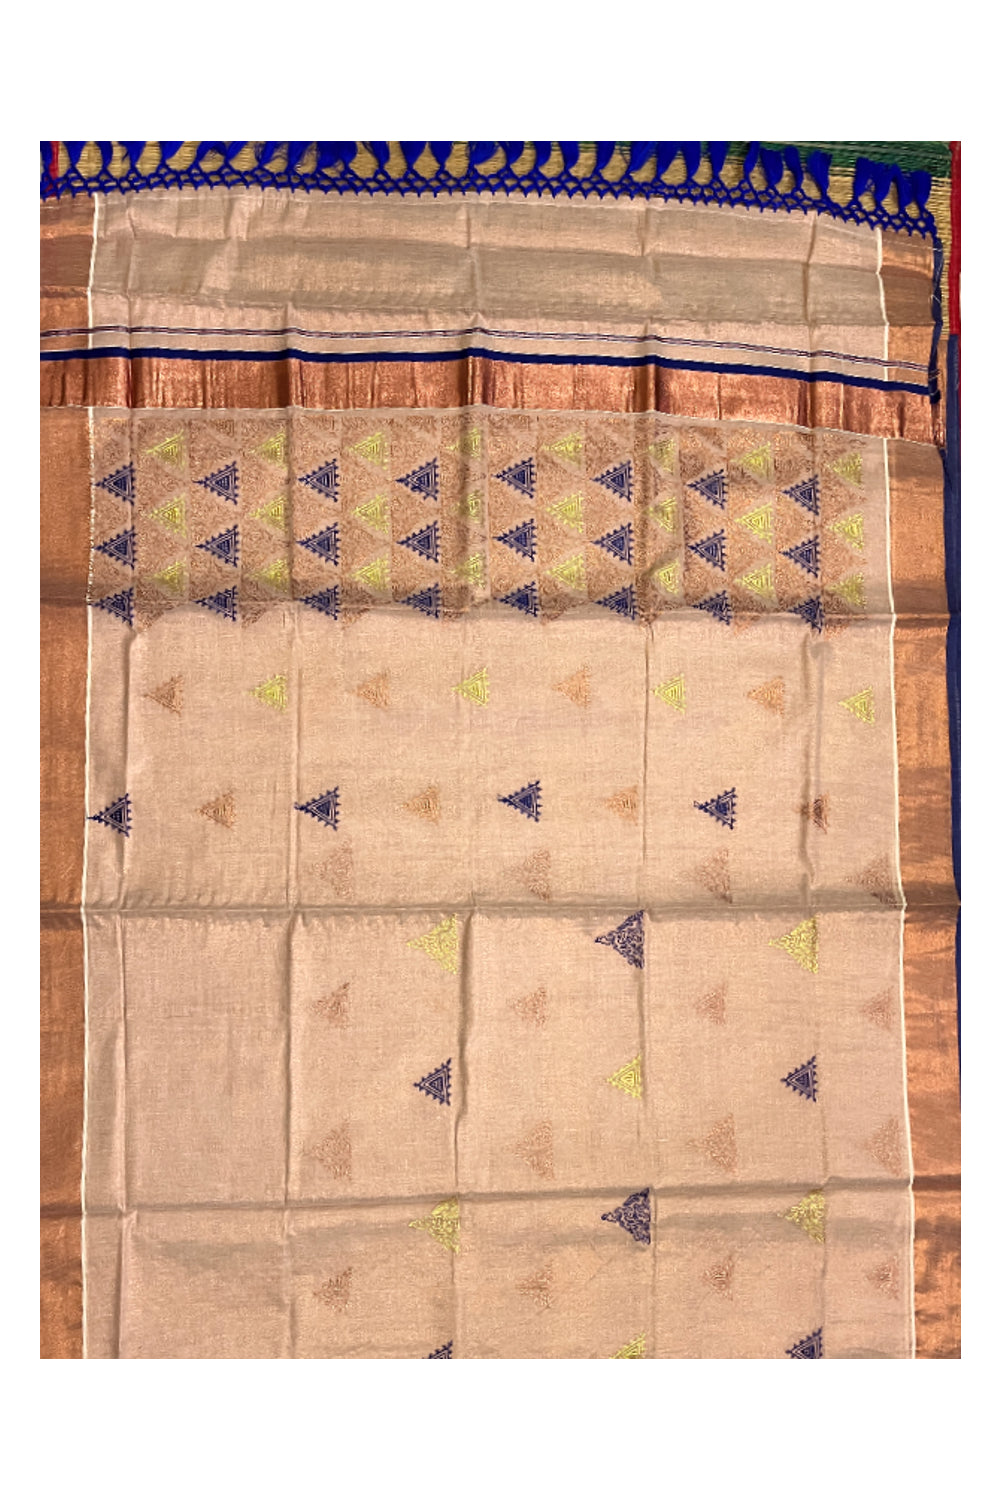 Southloom Copper Tissue Kasavu Saree with Embroidery Design and Blue Tassels Works on Pallu